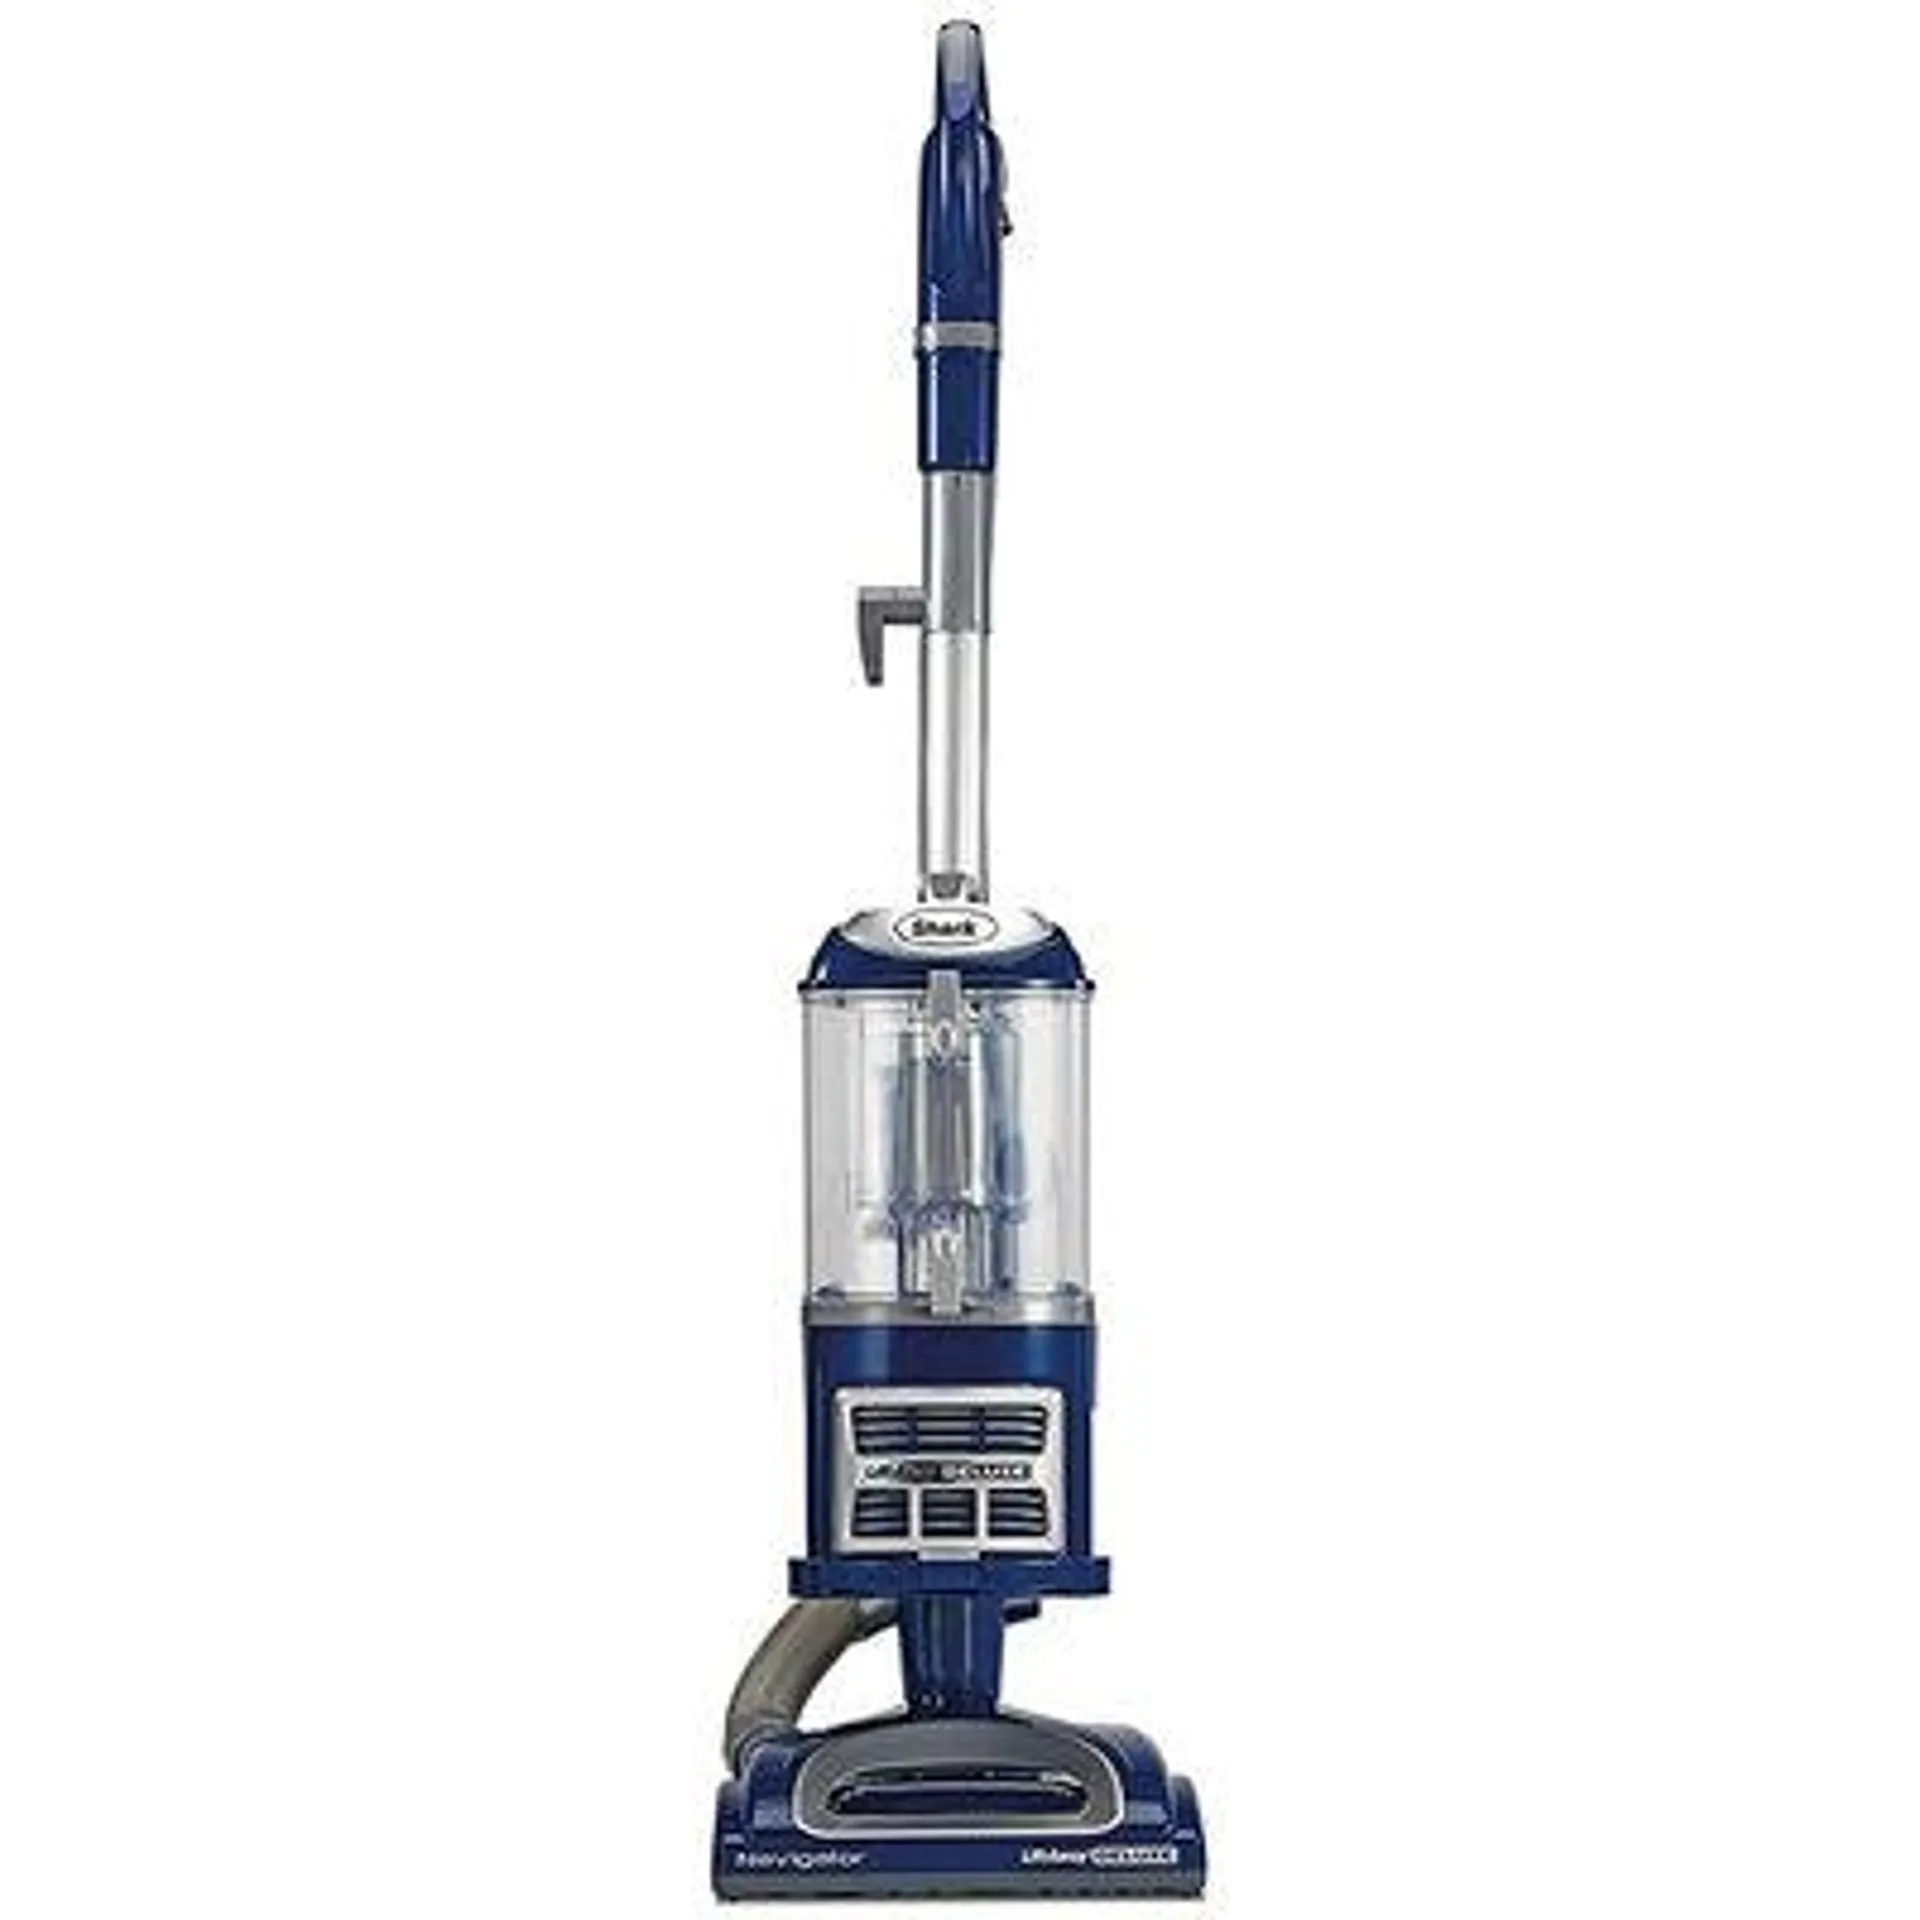 Shark Navigator Lift-Away Bagless Upright Vacuum with HEPA Filter and 3 Multi-Use Tools